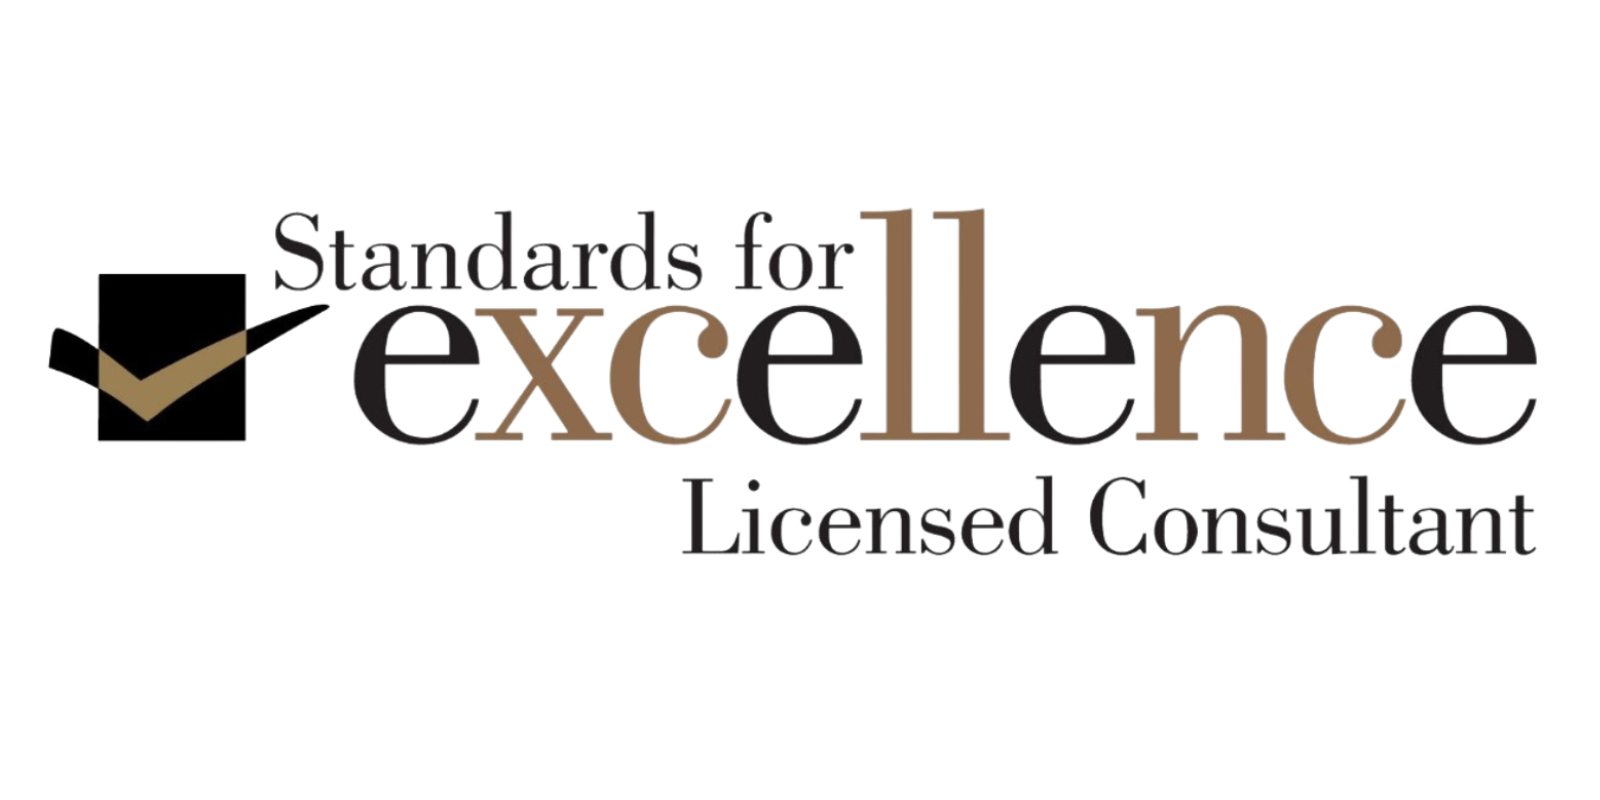 Standards for excellence licensed consultant